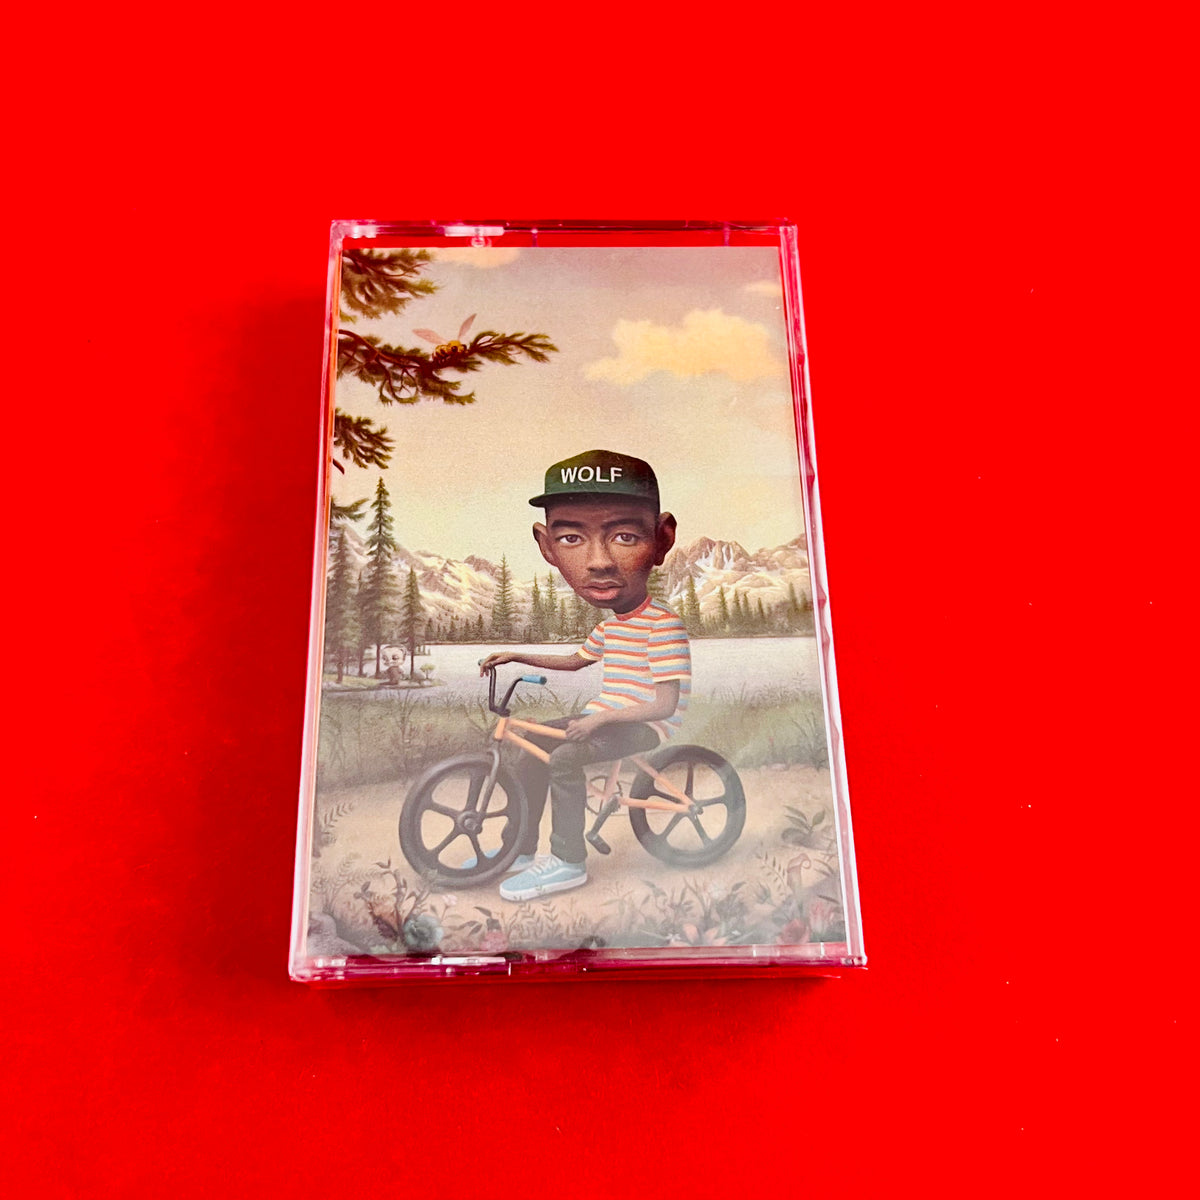 TYLER THE CREATOR WOLF (PAINTING COVER) TAPE – Lunchbox Records